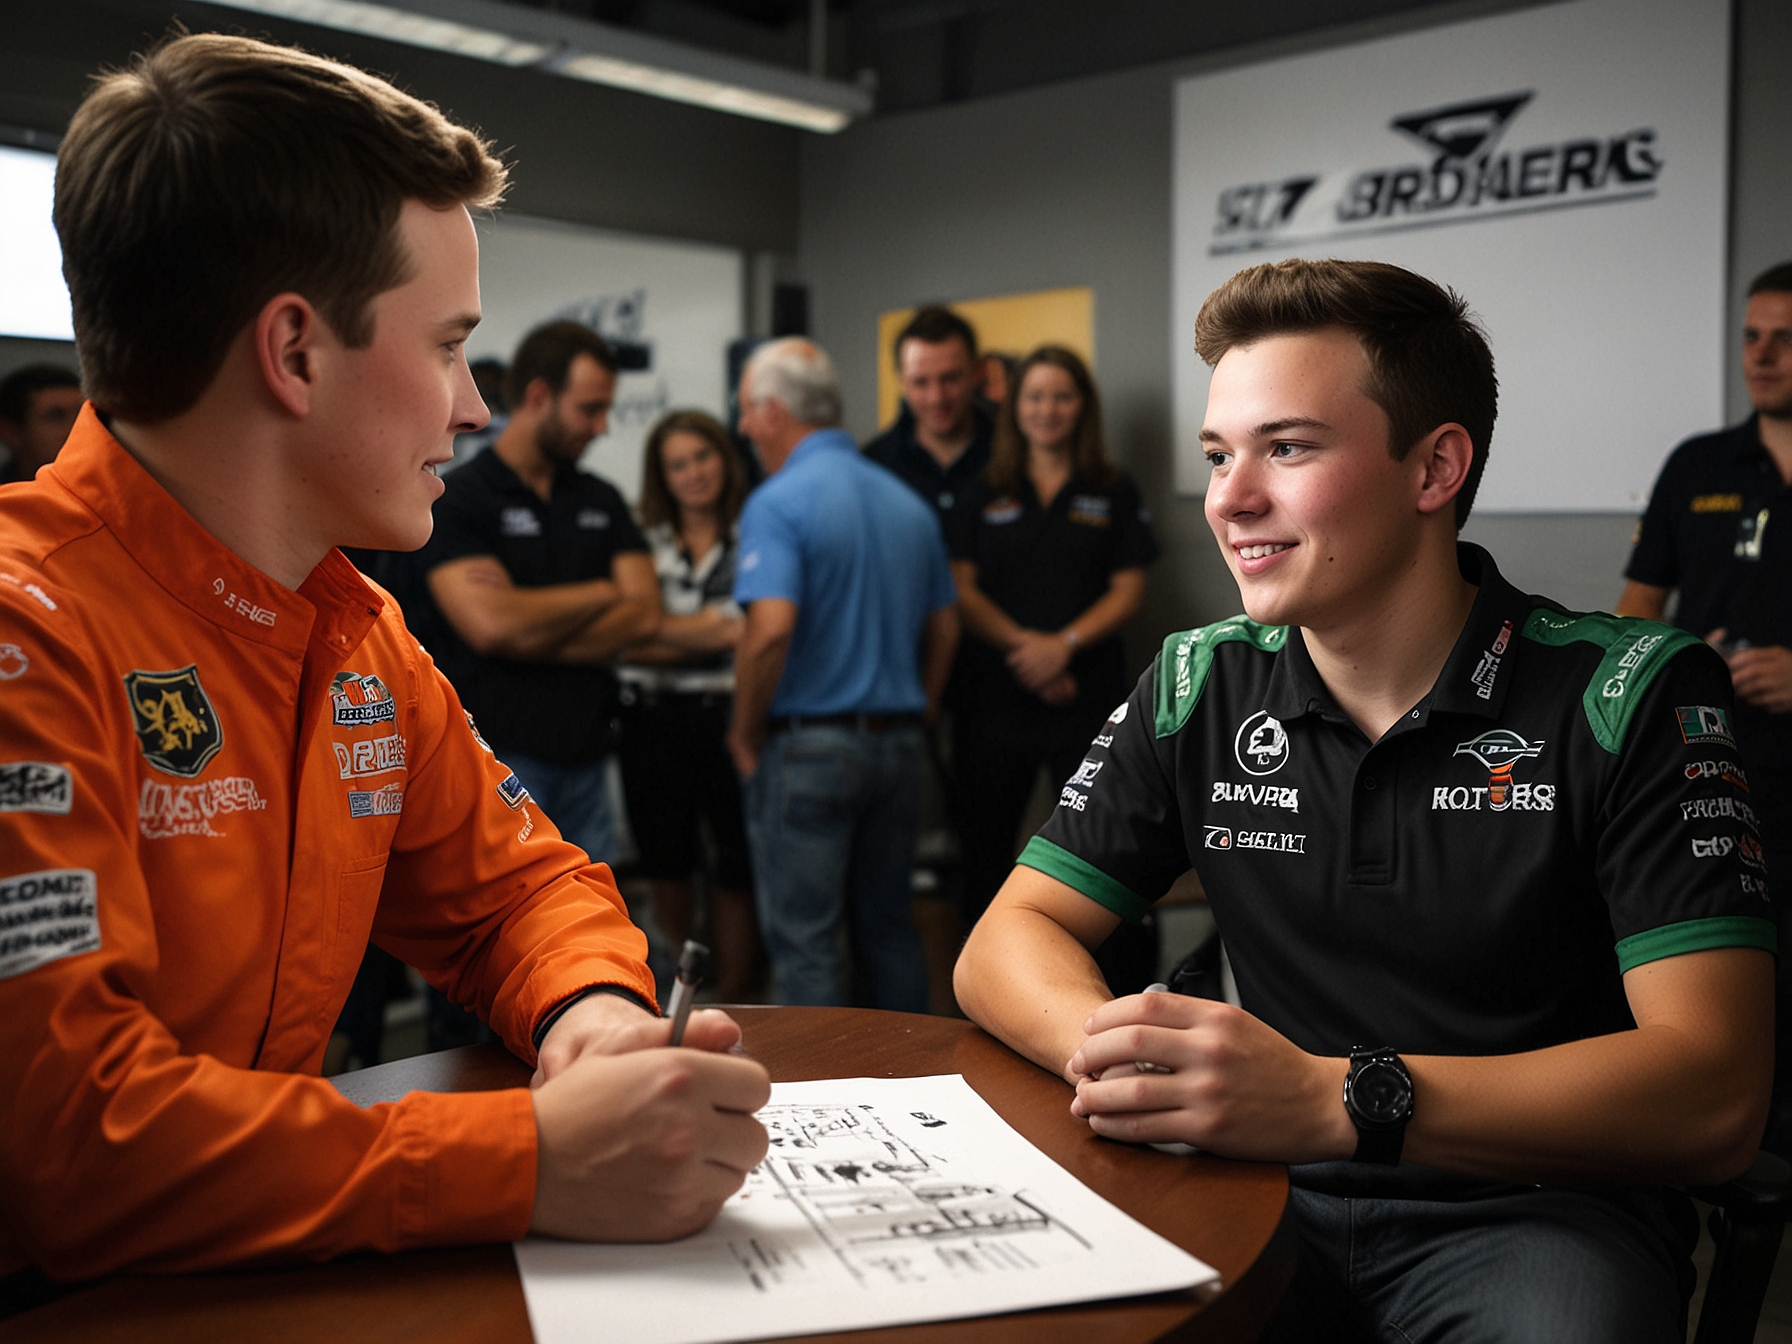 Christopher Bell during a media interview, where he accidentally revealed that Chase Briscoe might join Joe Gibbs Racing. The candid moment has sparked widespread speculation among NASCAR enthusiasts.